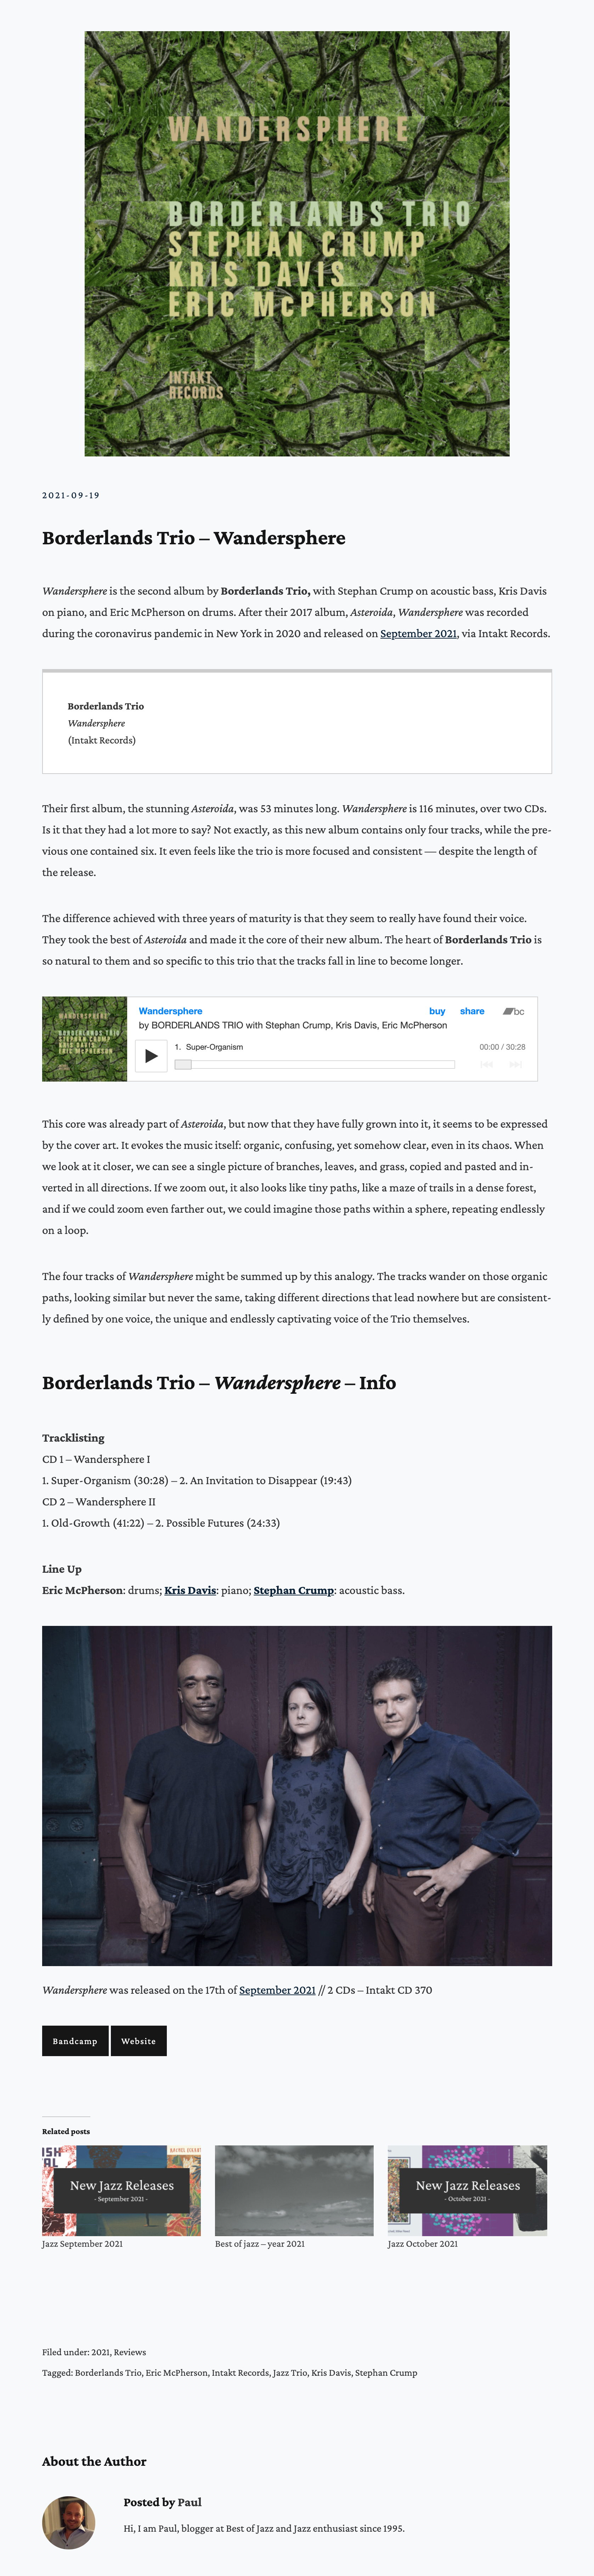 Wandersphere is the second album by Borderlands Trio, with Stephan Crump on acoustic bass, Kris Davis on piano, and Eric McPherson on drums. After their 2017 album, Asteroida, Wandersphere was recorded during the coronavirus pandemic in New York in 2020 and released on September 2021, via Intakt Records.